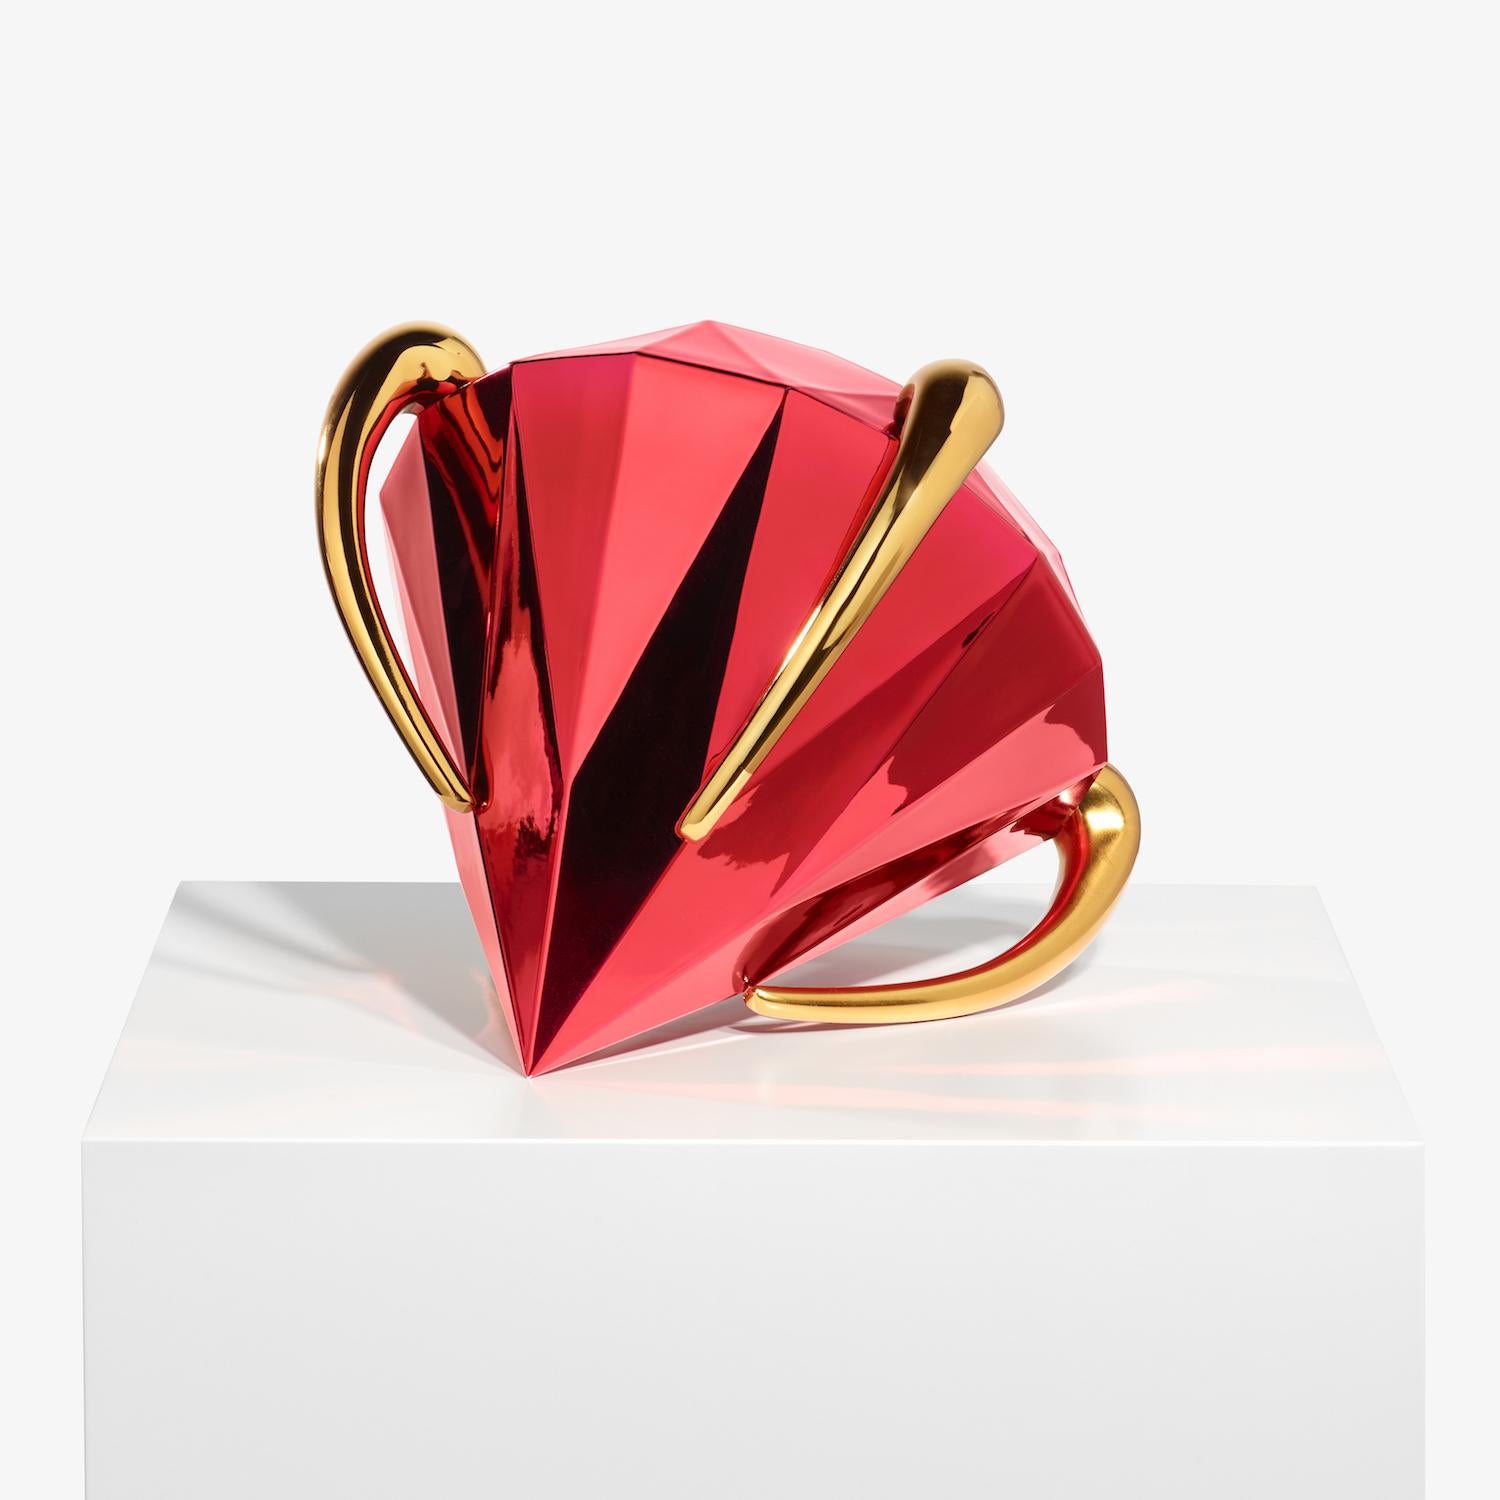 Red Diamond Sculpture by Jeff Koons, Porcelain, Luxury Objects, Contemporary Art For Sale 2